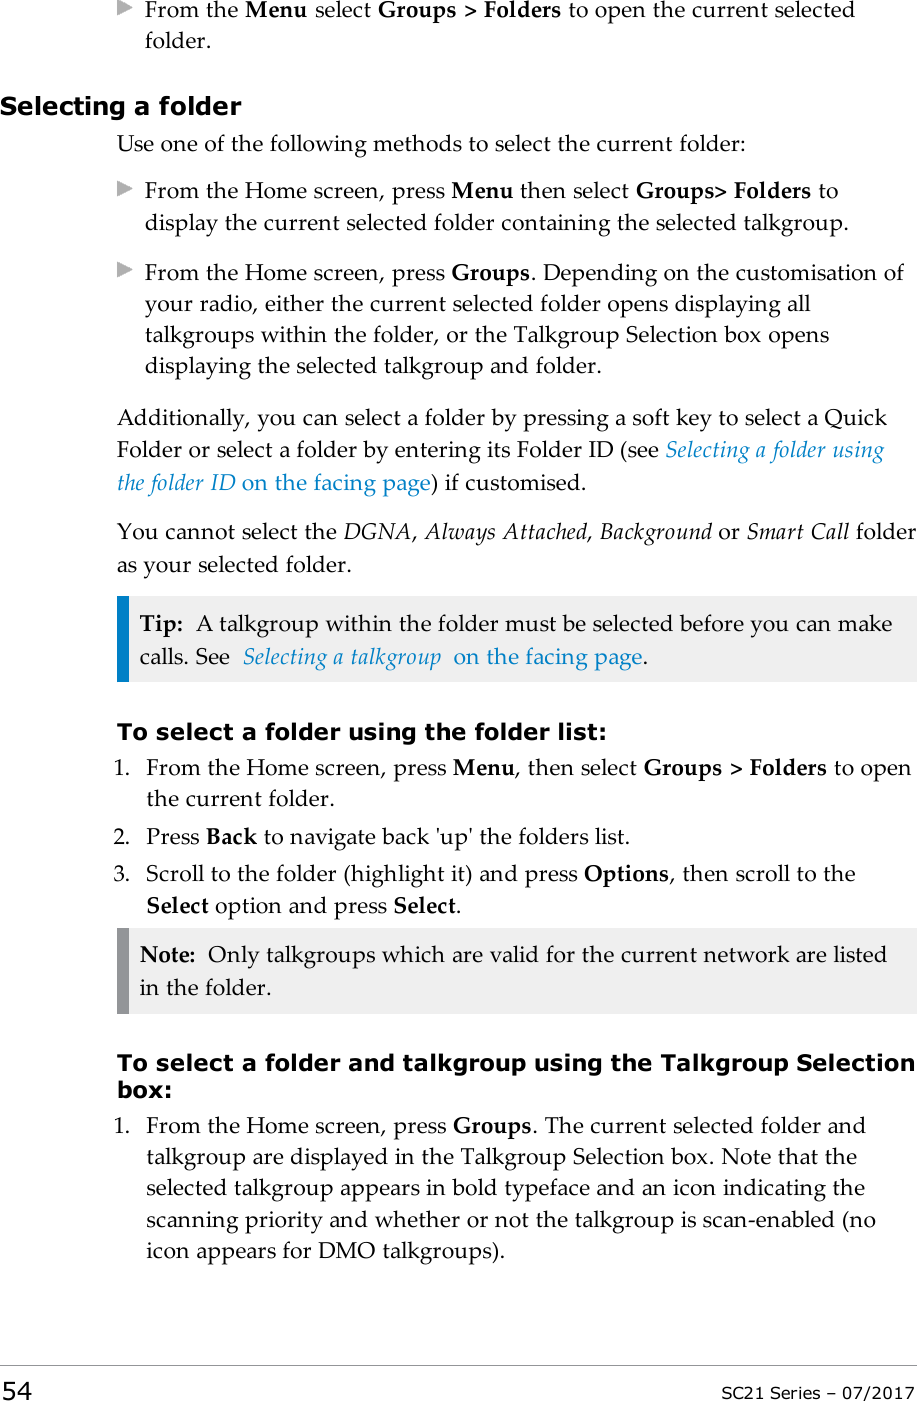 From the Menu select Groups &gt; Folders to open the current selectedfolder.Selecting a folderUse one of the following methods to select the current folder:From the Home screen, press Menu then select Groups&gt; Folders todisplay the current selected folder containing the selected talkgroup.From the Home screen, press Groups. Depending on the customisation ofyour radio, either the current selected folder opens displaying alltalkgroups within the folder, or the Talkgroup Selection box opensdisplaying the selected talkgroup and folder.Additionally, you can select a folder by pressing a soft key to select a QuickFolder or select a folder by entering its Folder ID (see Selecting a folder usingthe folder ID on the facing page) if customised.You cannot select the DGNA,Always Attached,Background or Smart Call folderas your selected folder.Tip: A talkgroup within the folder must be selected before you can makecalls. See Selecting a talkgroup on the facing page.To select a folder using the folder list:1. From the Home screen, press Menu, then select Groups &gt; Folders to openthe current folder.2. Press Back to navigate back &apos;up&apos; the folders list.3. Scroll to the folder (highlight it) and press Options, then scroll to theSelect option and press Select.Note: Only talkgroups which are valid for the current network are listedin the folder.To select a folder and talkgroup using the Talkgroup Selectionbox:1. From the Home screen, press Groups. The current selected folder andtalkgroup are displayed in the Talkgroup Selection box. Note that theselected talkgroup appears in bold typeface and an icon indicating thescanning priority and whether or not the talkgroup is scan-enabled (noicon appears for DMO talkgroups).54 SC21 Series – 07/2017